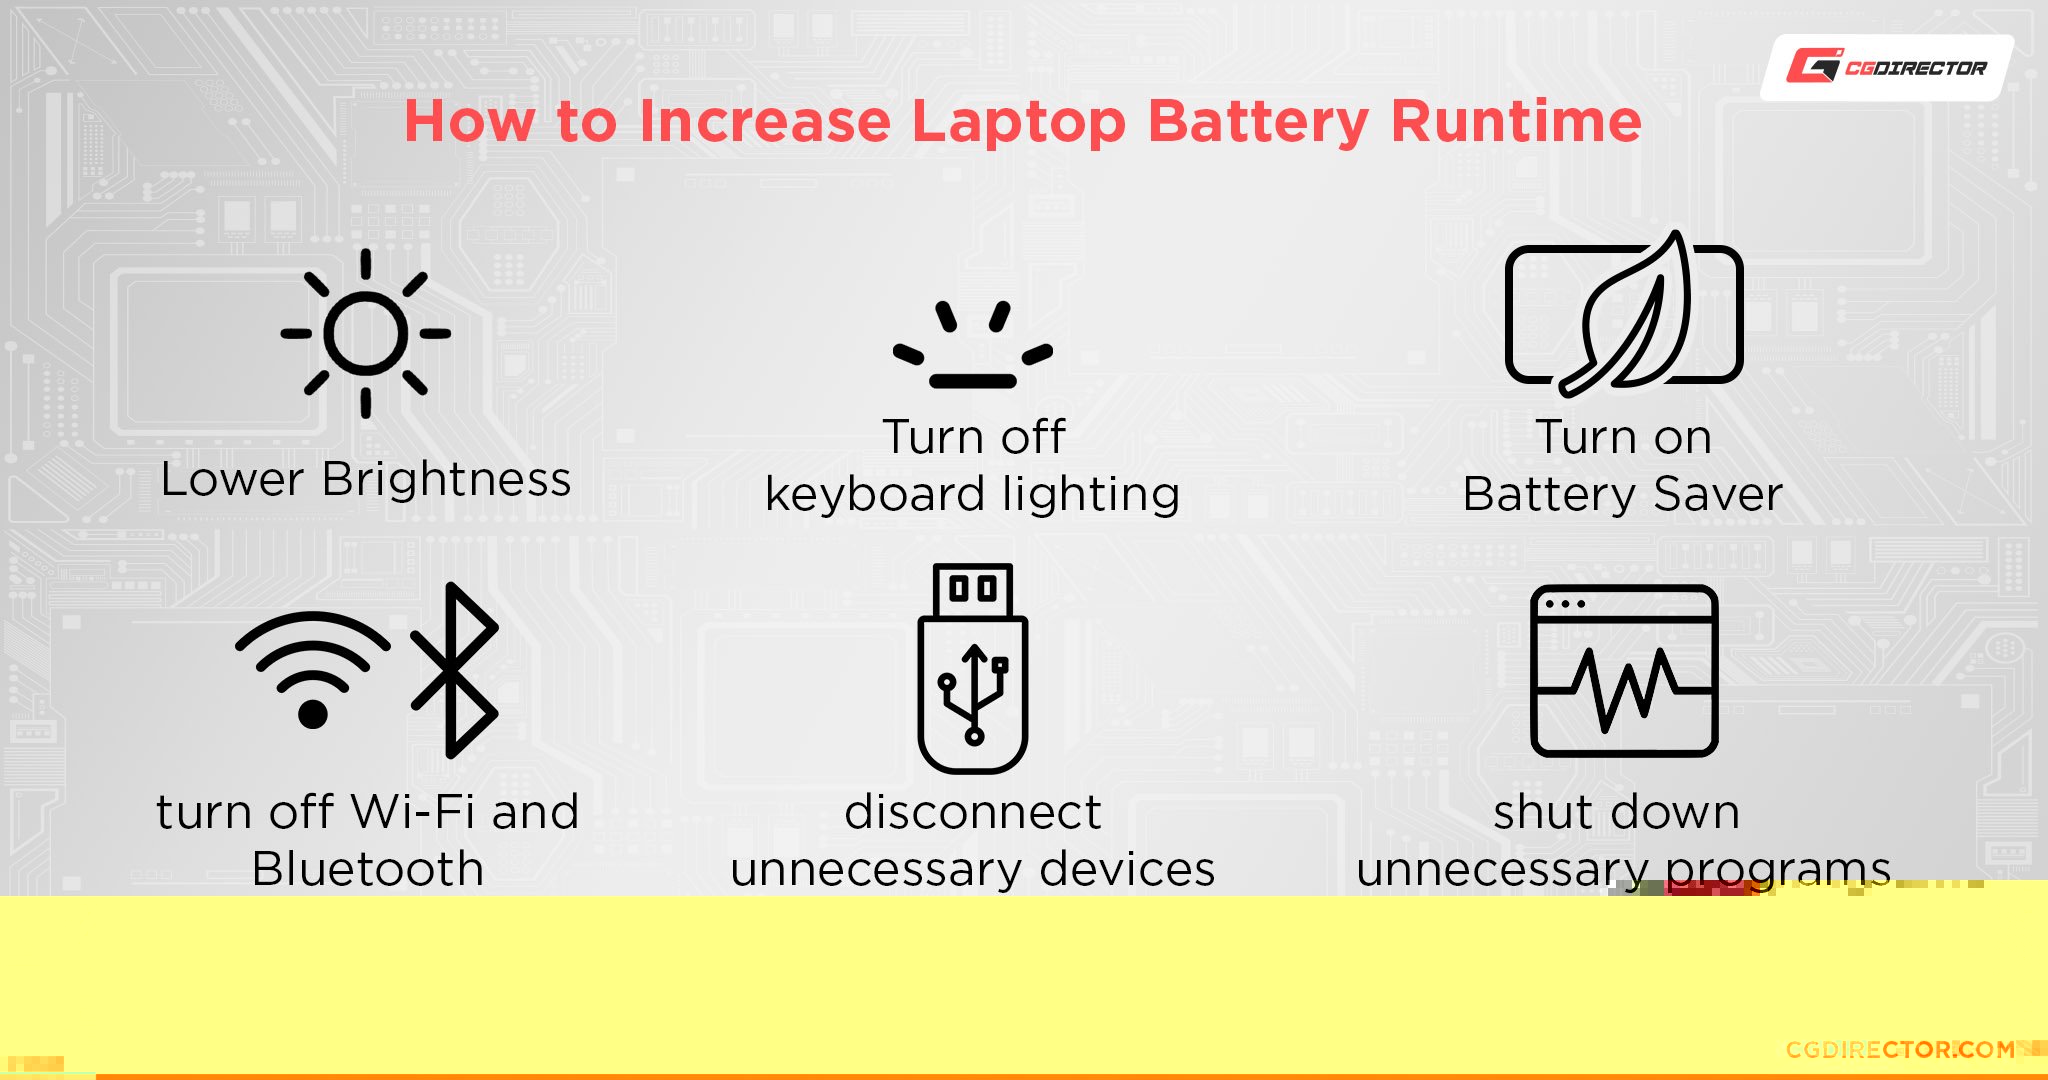 How to Increase Laptop Battery Runtime